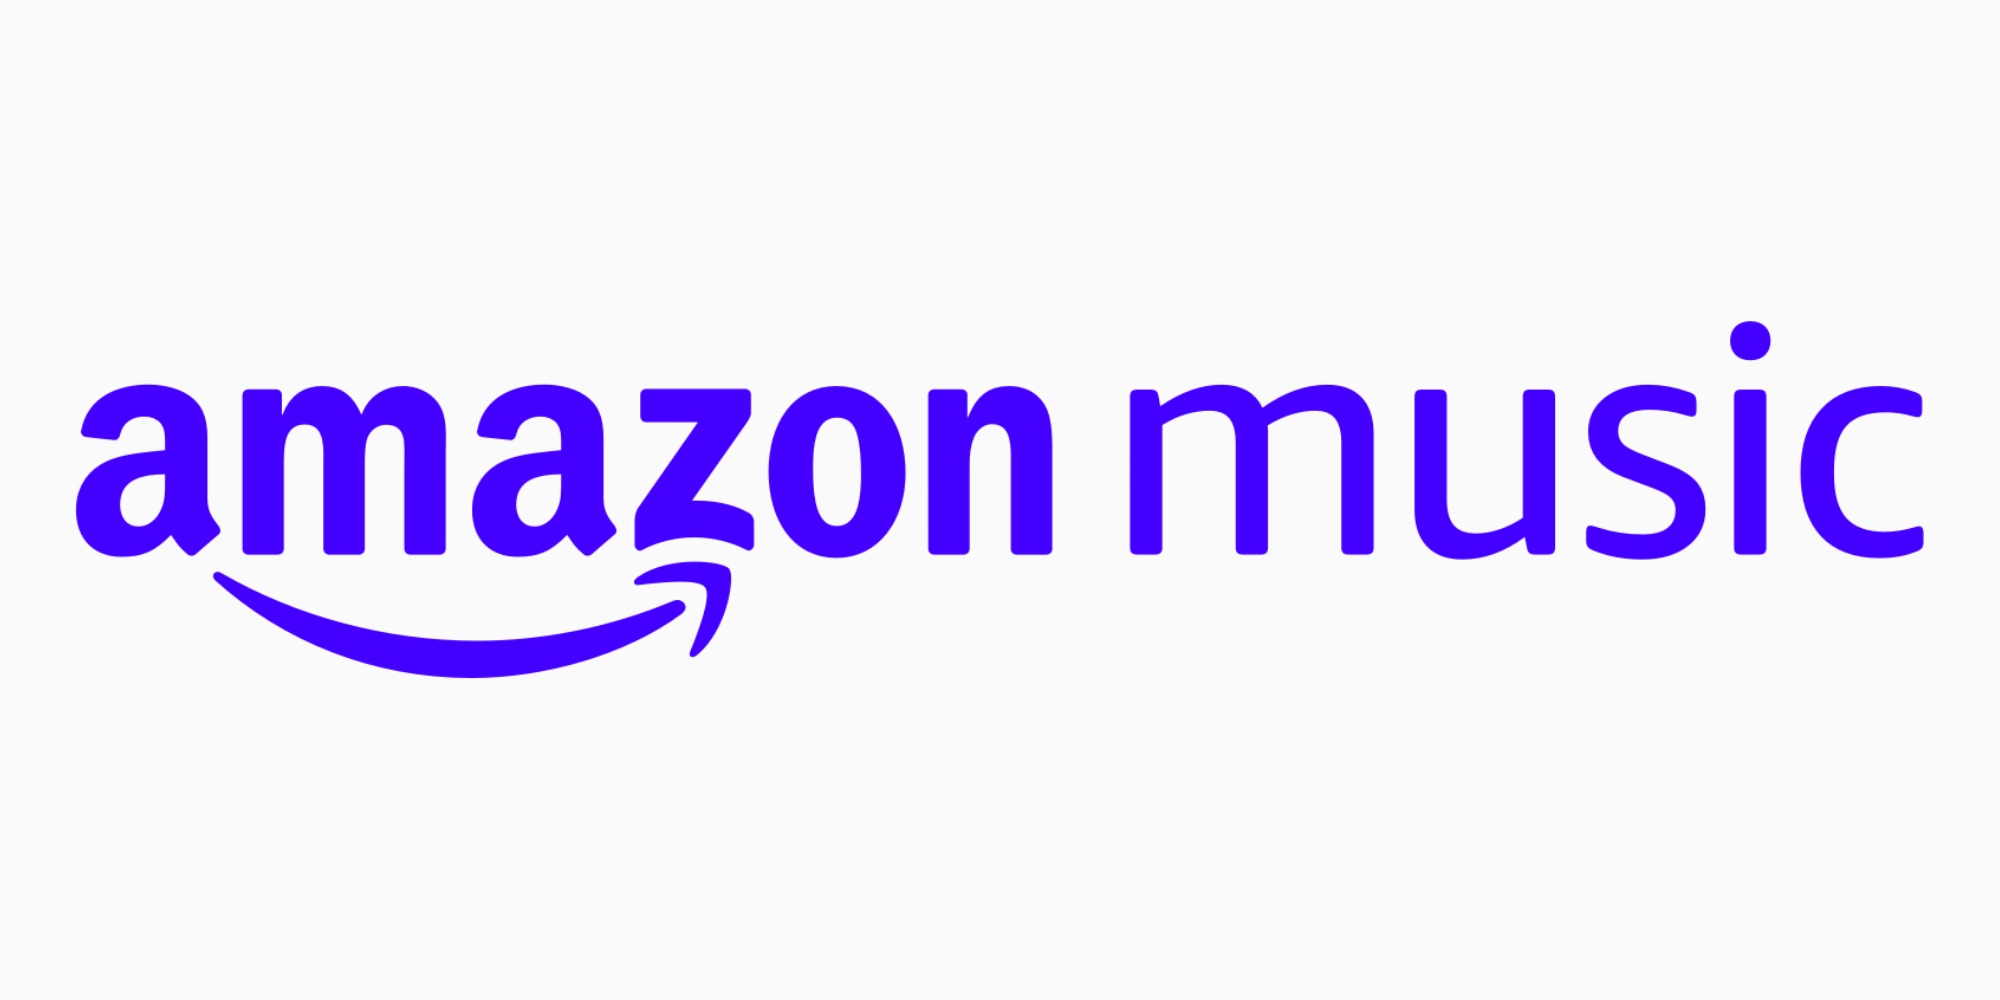 Amazon Music Launched in India, Now Available for Android, iOS, Windows,  Mac, Fire TV, and on the Web | Entertainment News